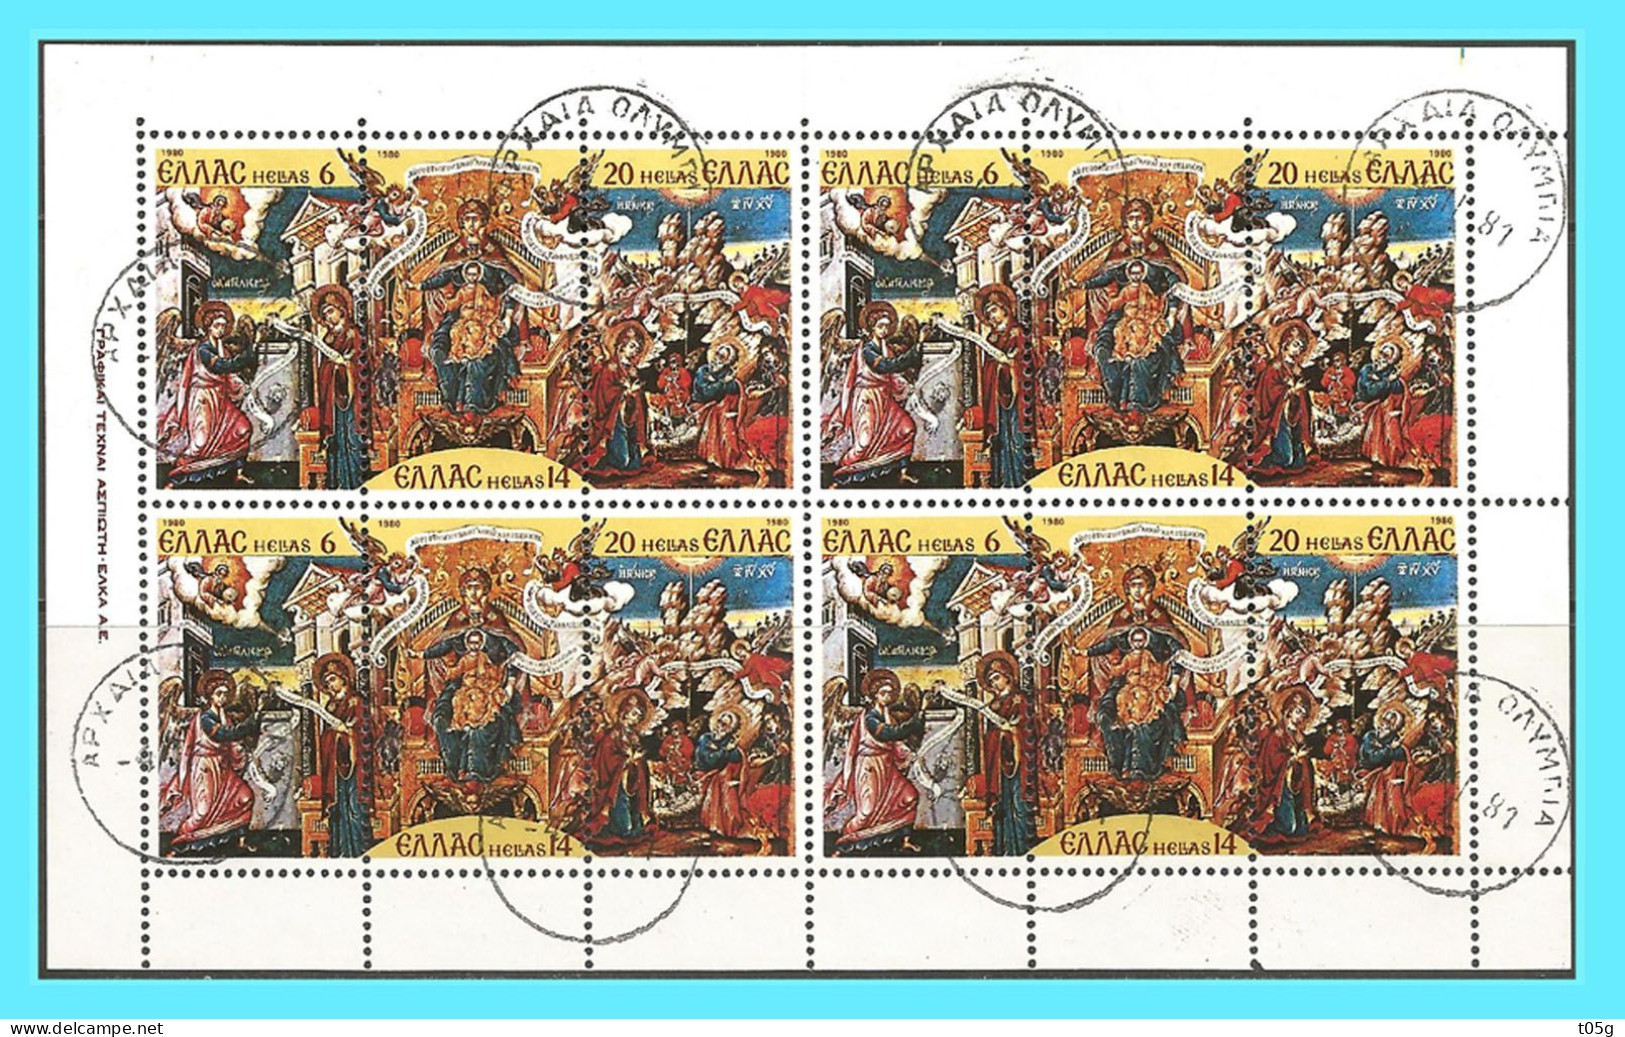 GREECE - GRECE- HELLAS 1980: Canc. (ΑΡΧΑΙΑ ΟΛΥΜΠΙΑ 6.V.81) Christmas, Se- Tenant Compl.sheet Used - Used Stamps